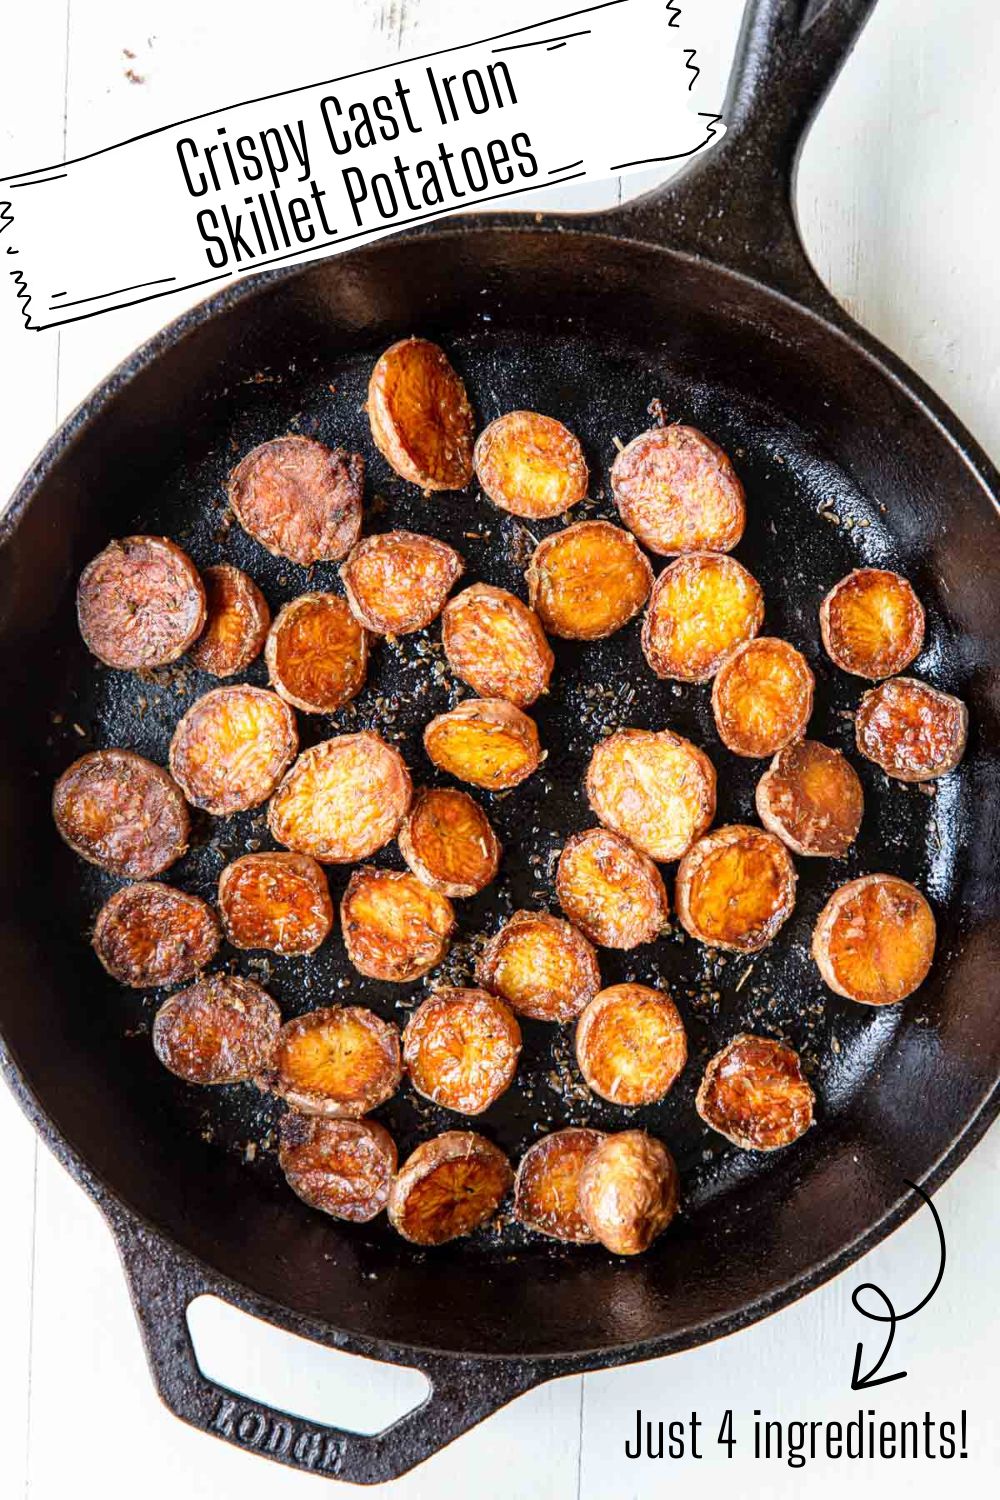 Cast Iron Skillet Potatoes with text overlay for Pinterest